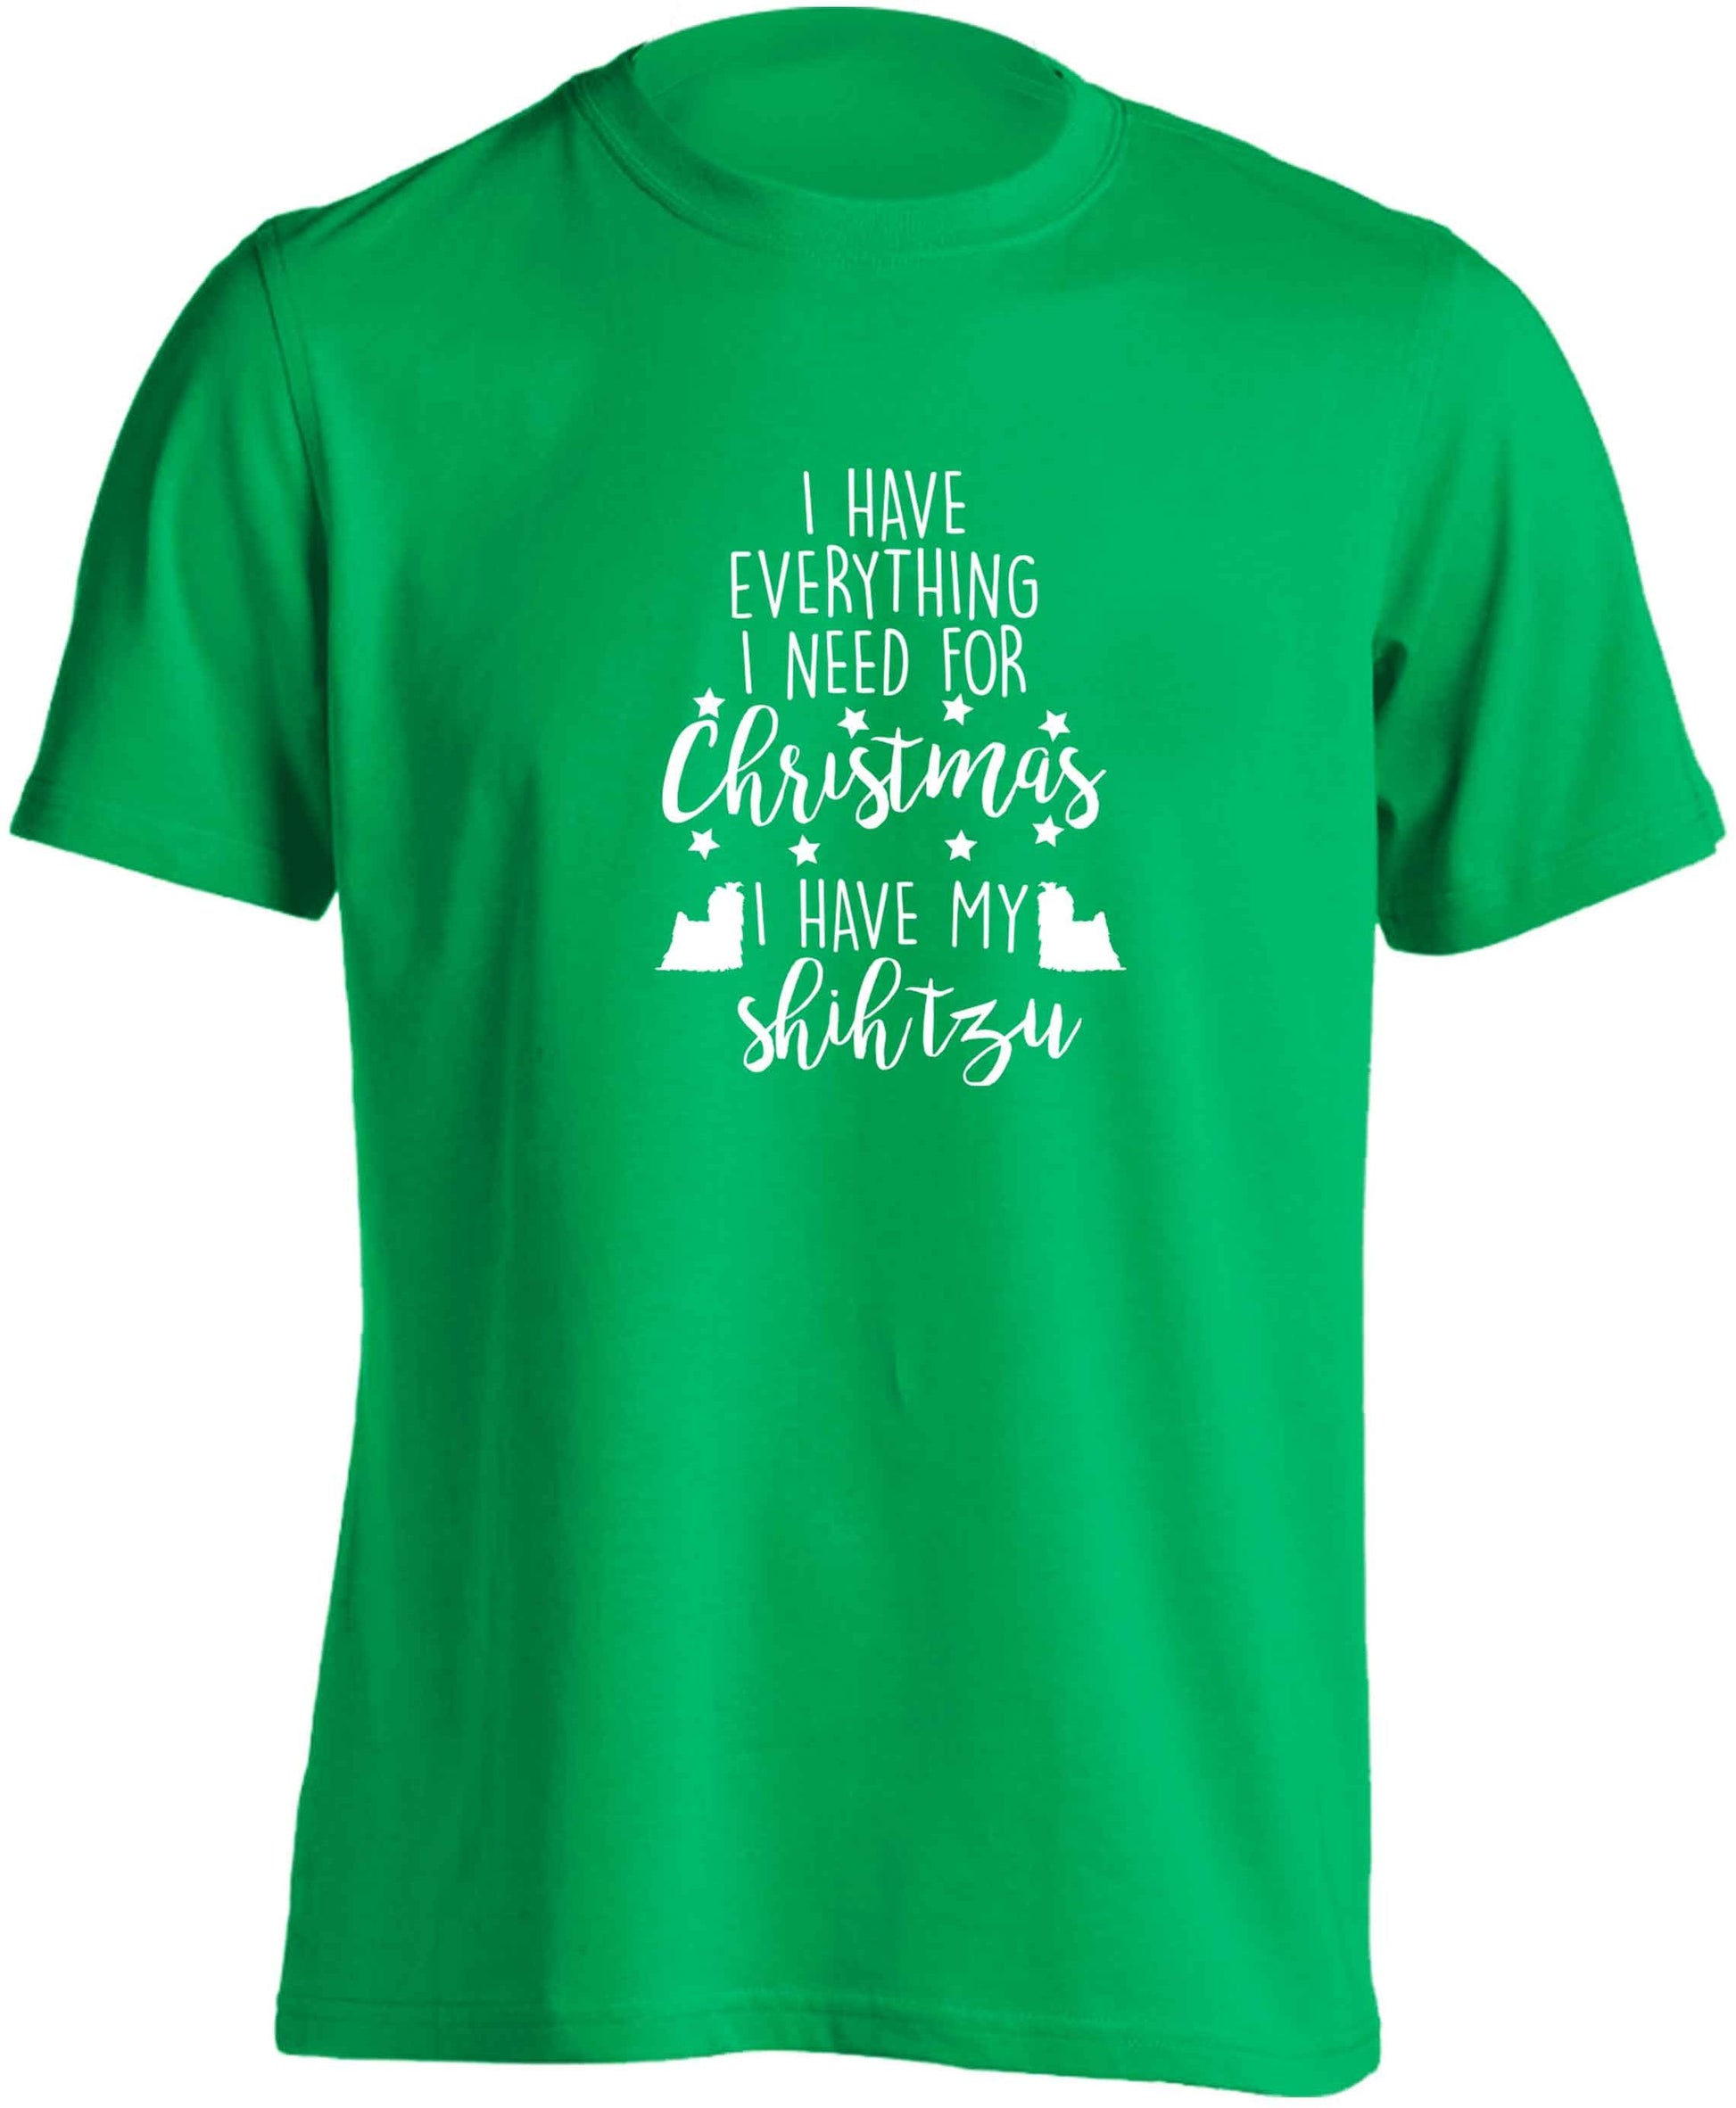 I have everything I need for Christmas I have my shih tzu adults unisex green Tshirt 2XL